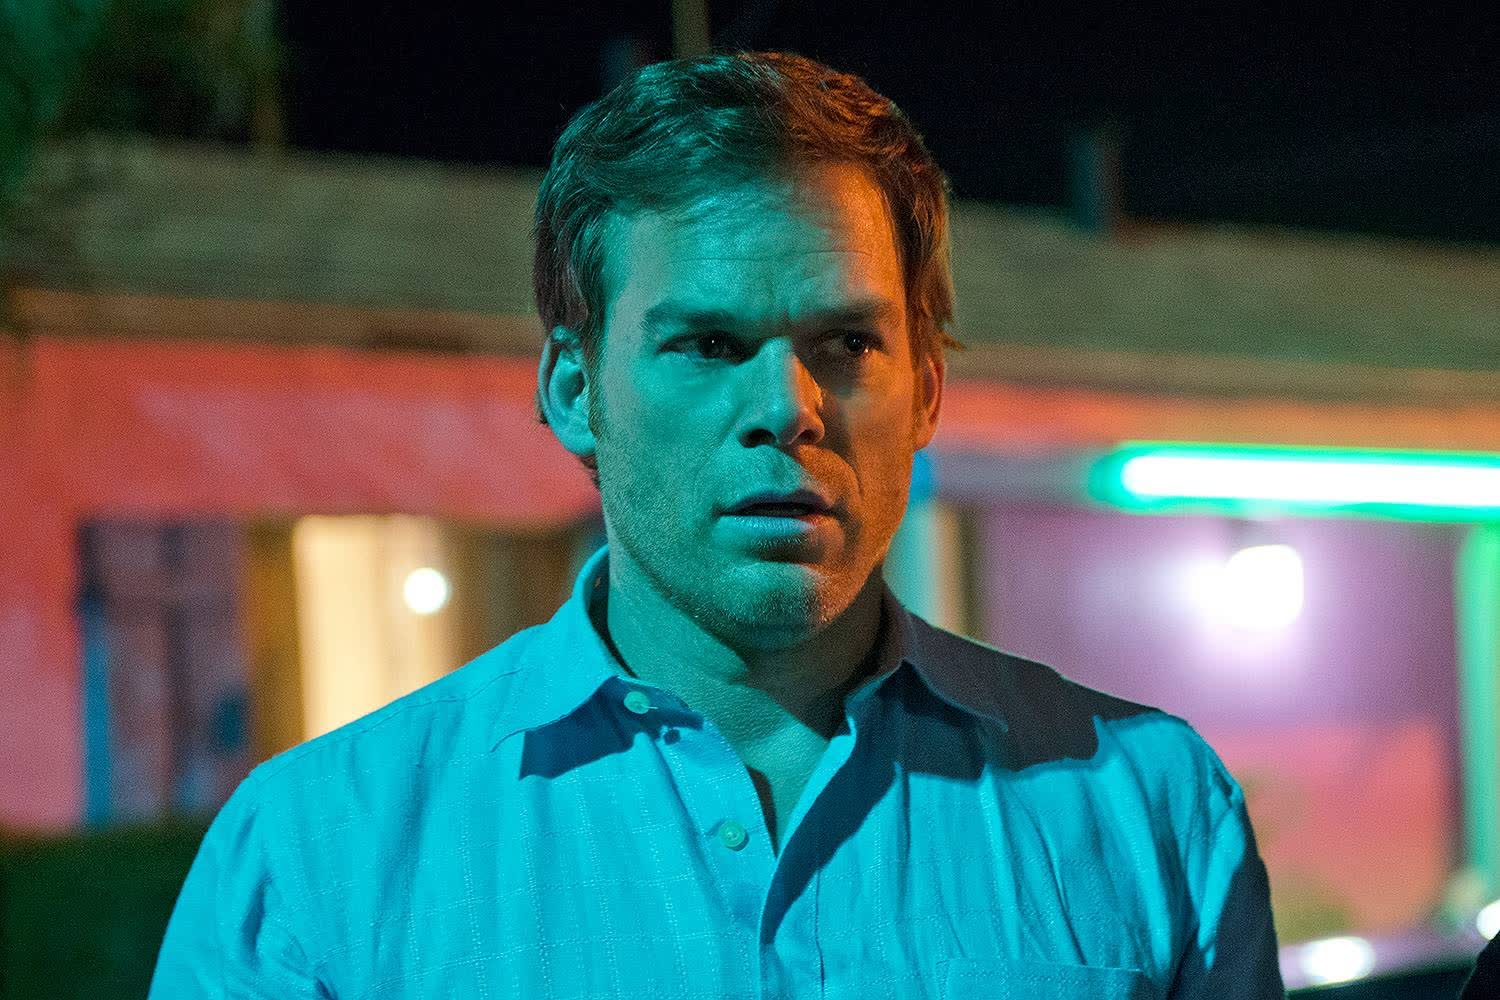 Dexter is up to his old ways in Showtime's new teaser